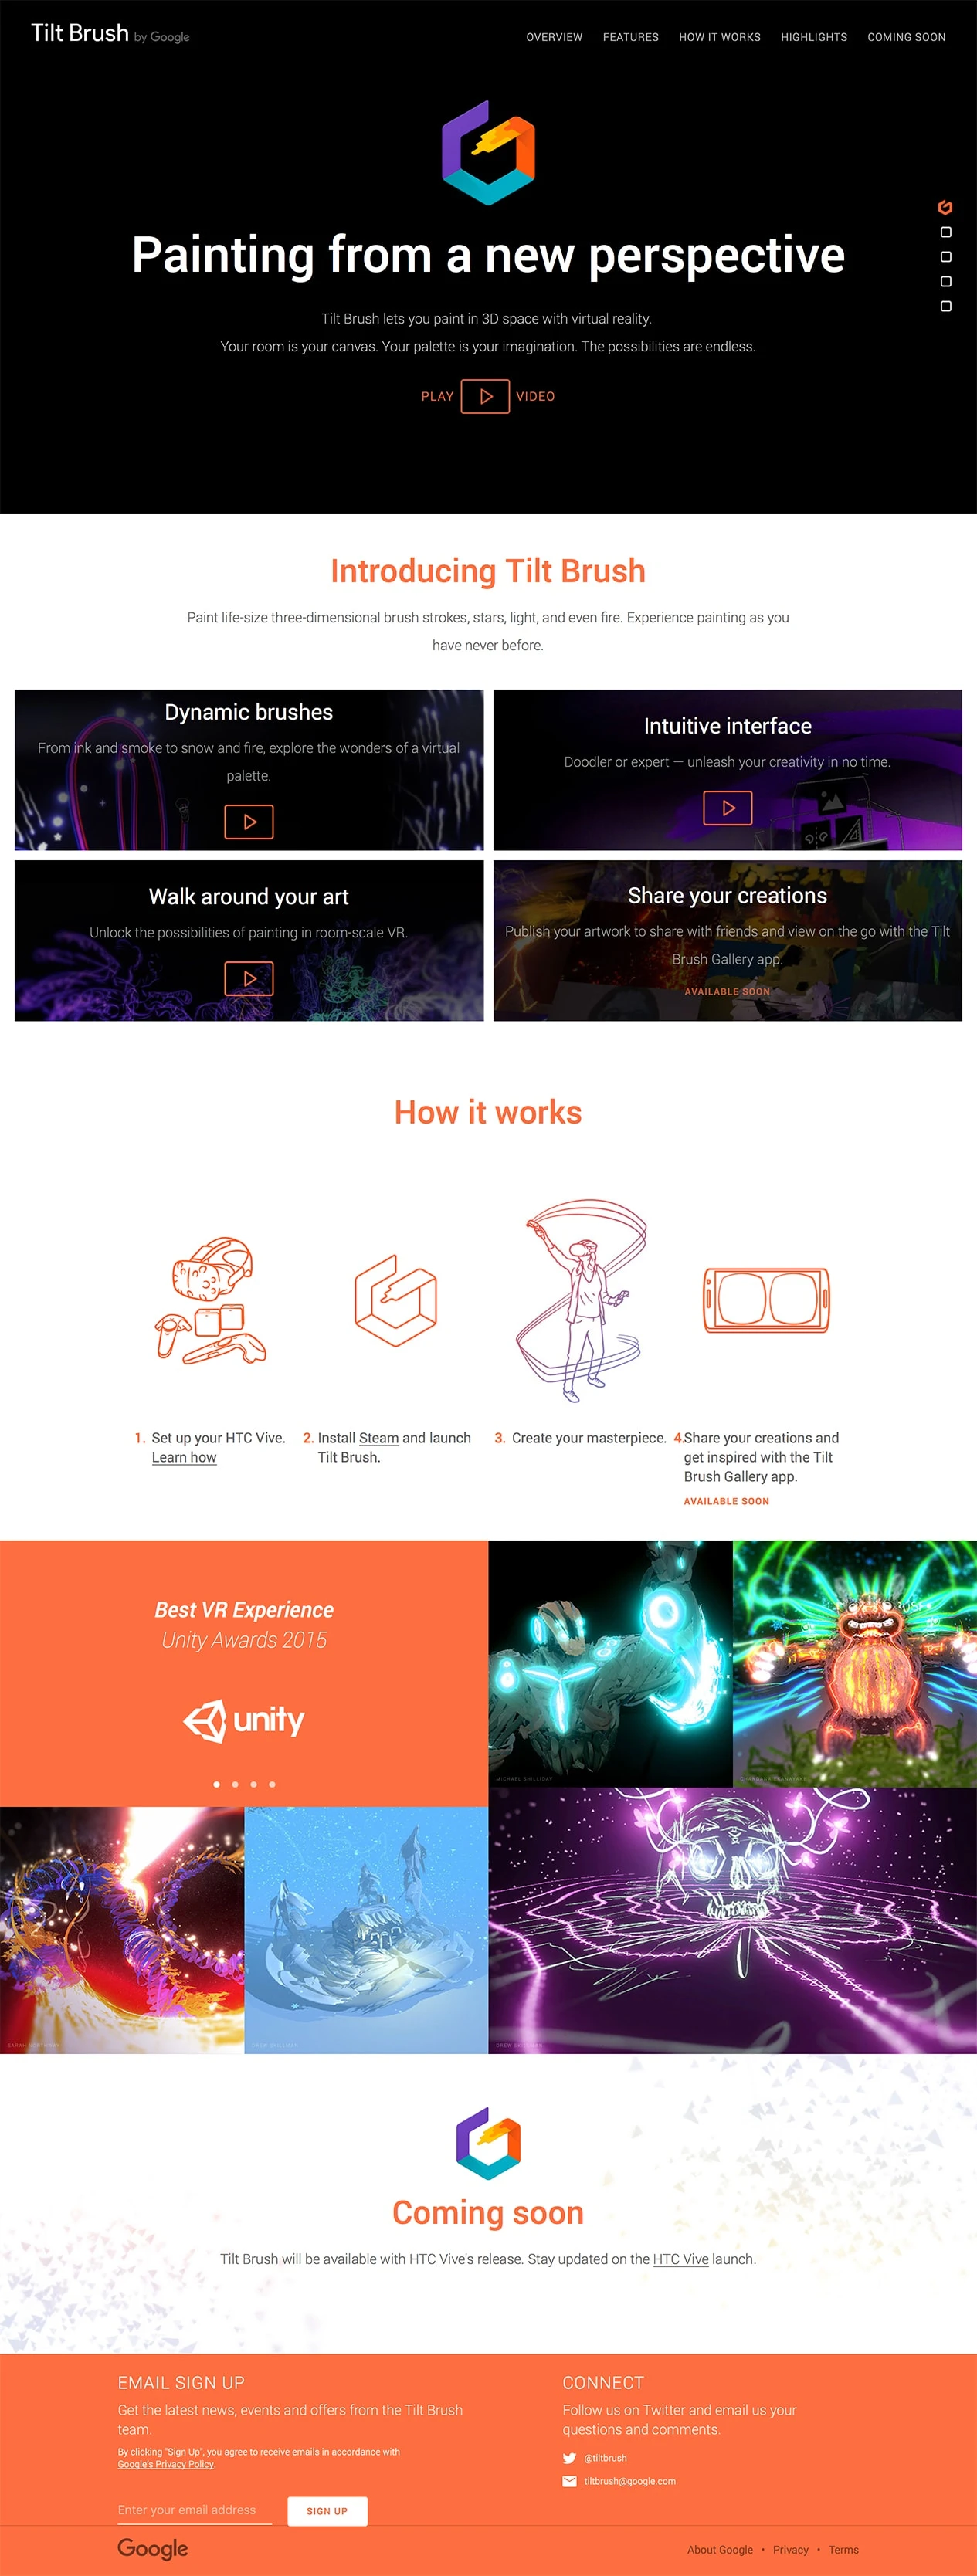 Tilt Brush by Google Landing Page Example: Tilt Brush lets you paint in 3D space with virtual reality. Your room is your canvas. Your palette is your imagination. The possibilities are endless.